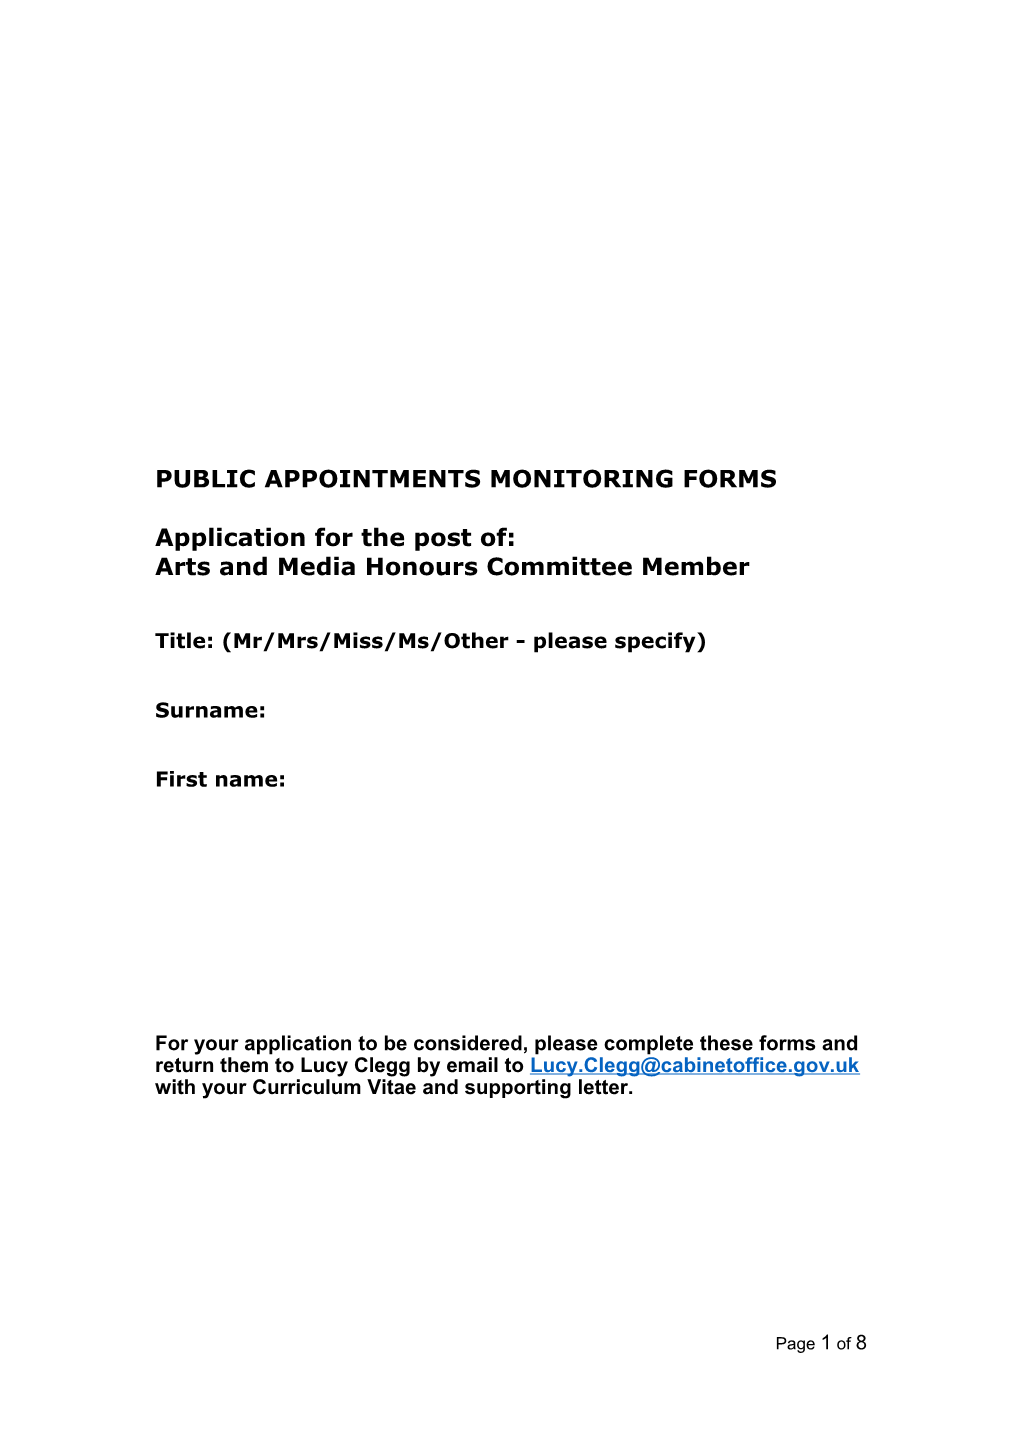 Public Appointments Monitoring Forms